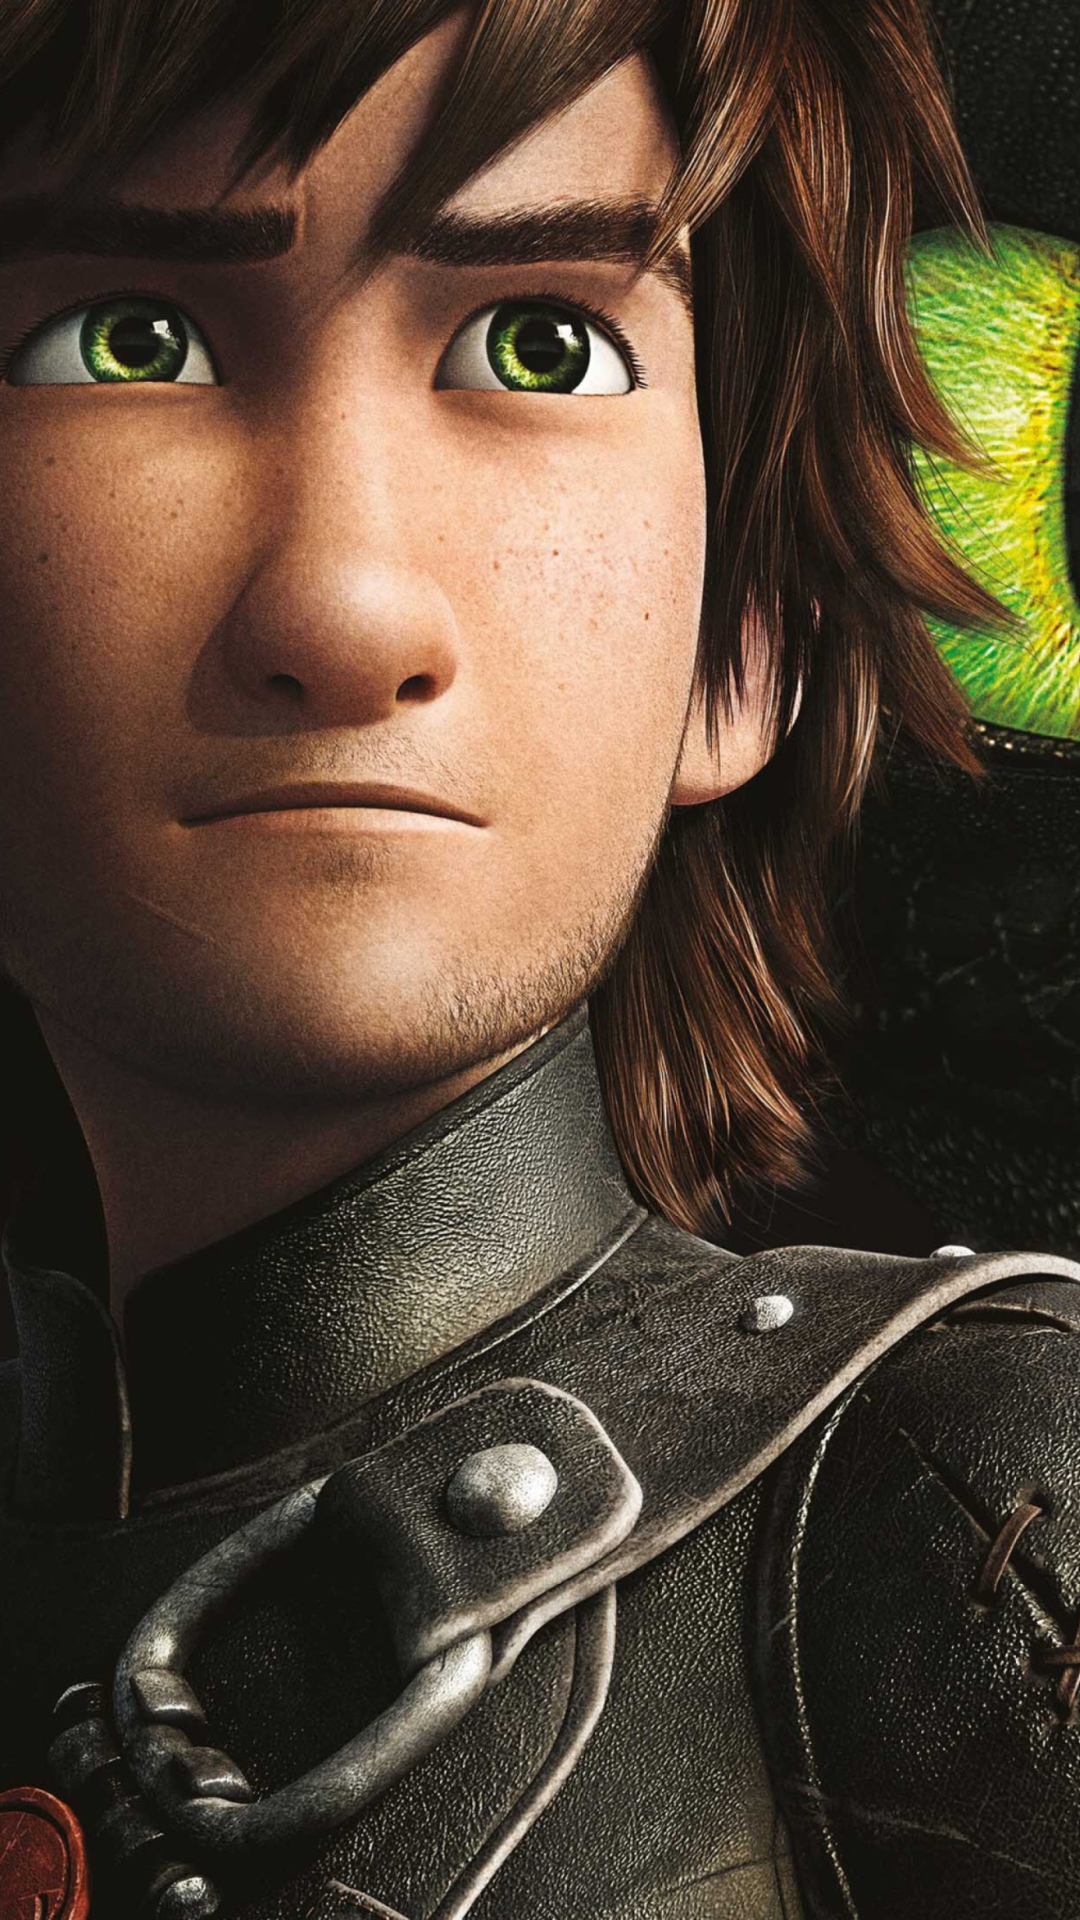 How To Train Your Dragon wallpaper 1080x1920